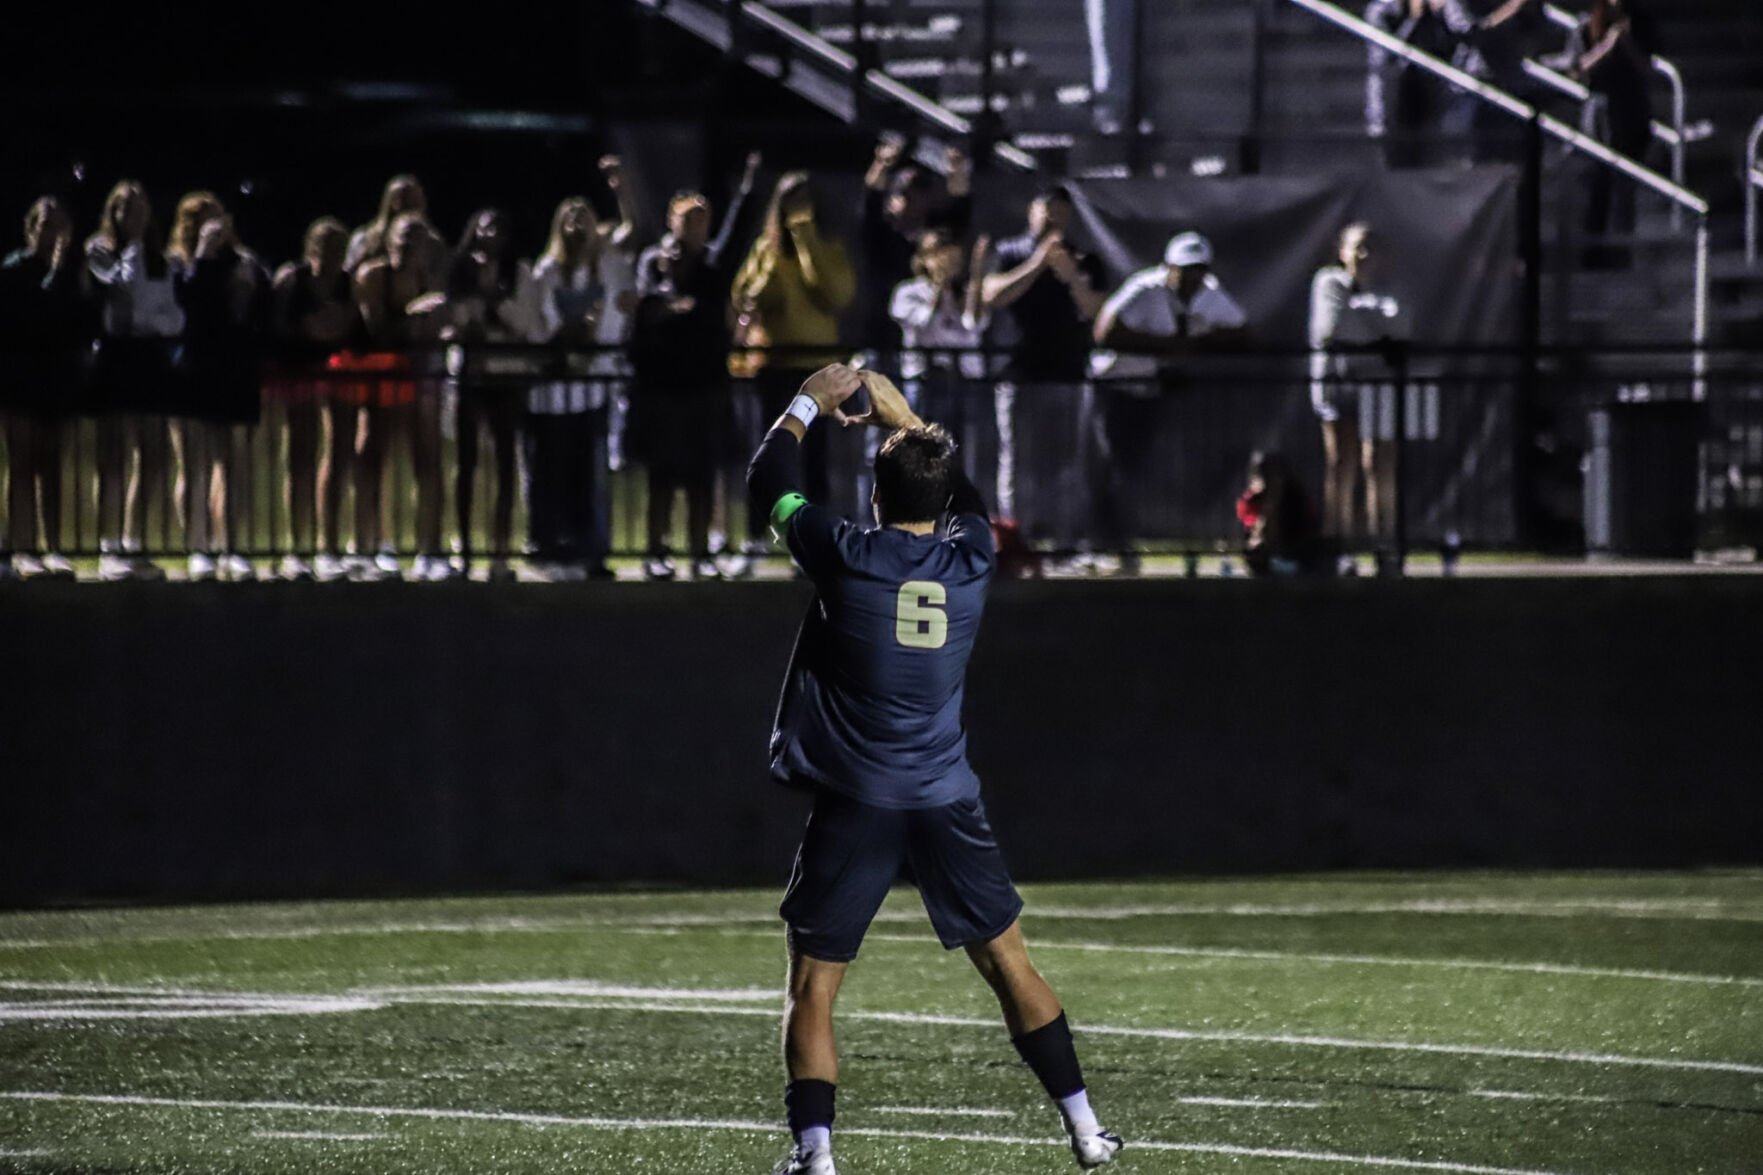 Lions survive: Christian Heritage wins on penalty kicks to return to state semis